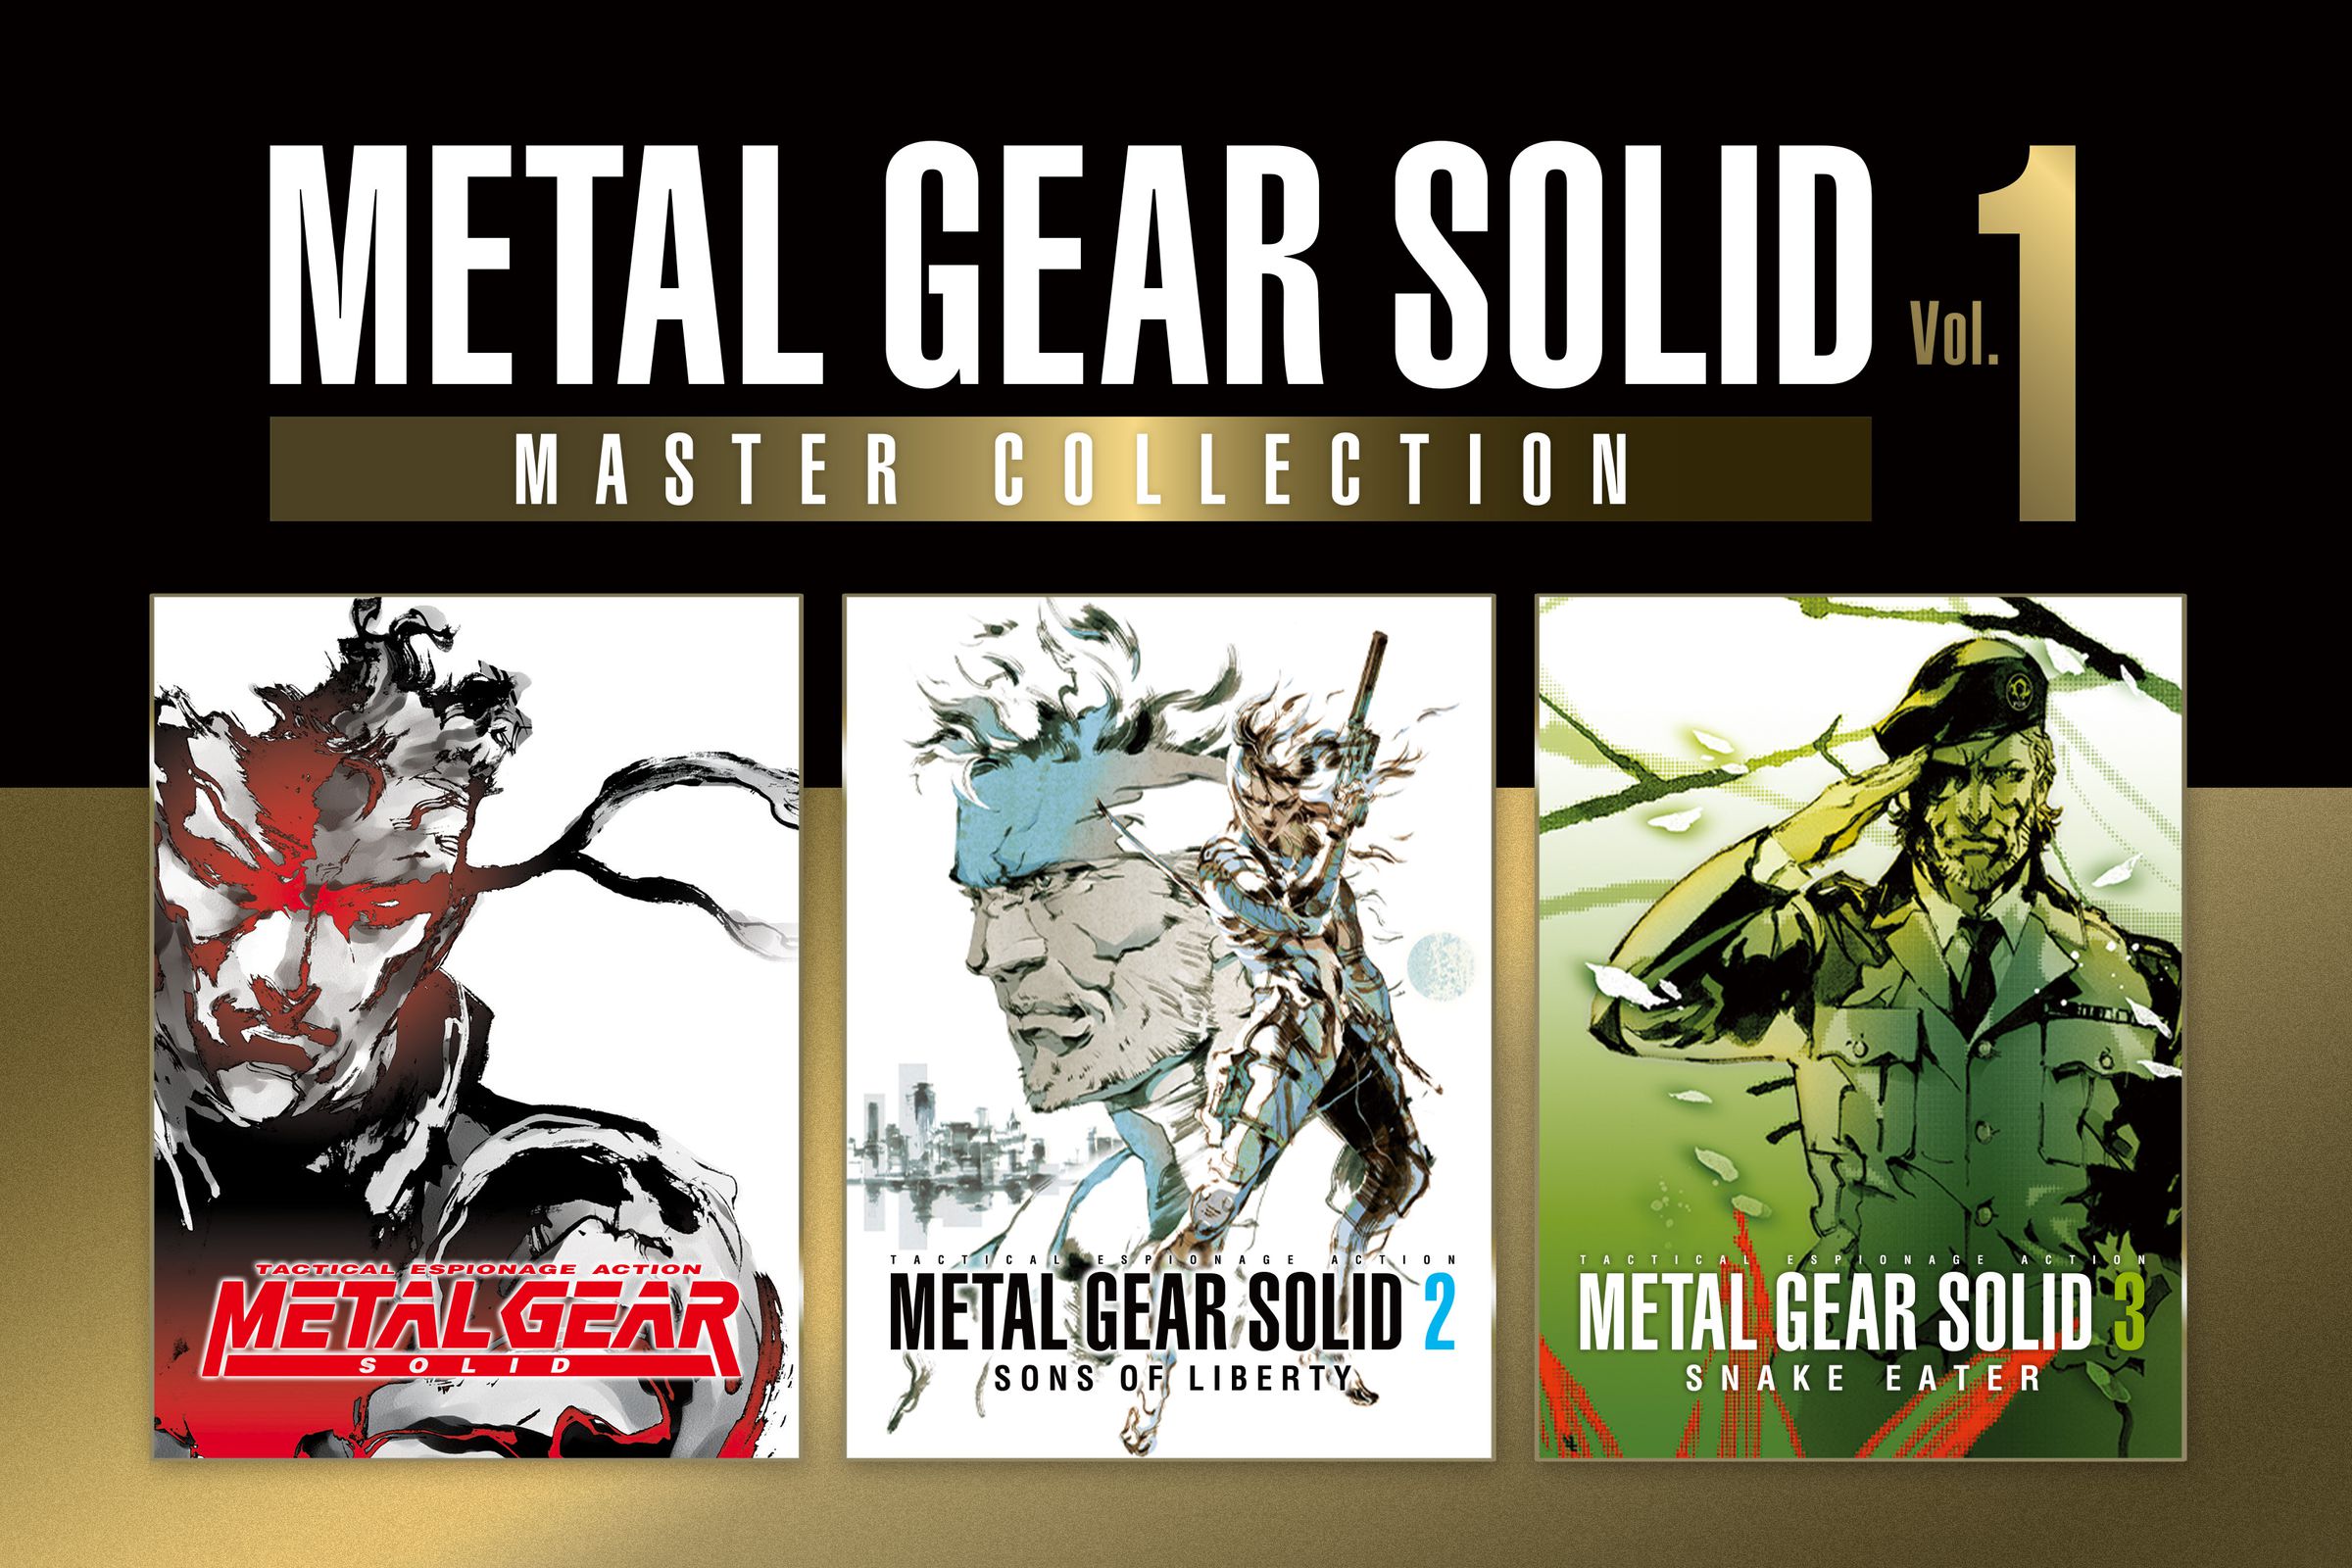 Metal Gear Solid Master collection press shot, with front covers of MGS1, 2, and 3.